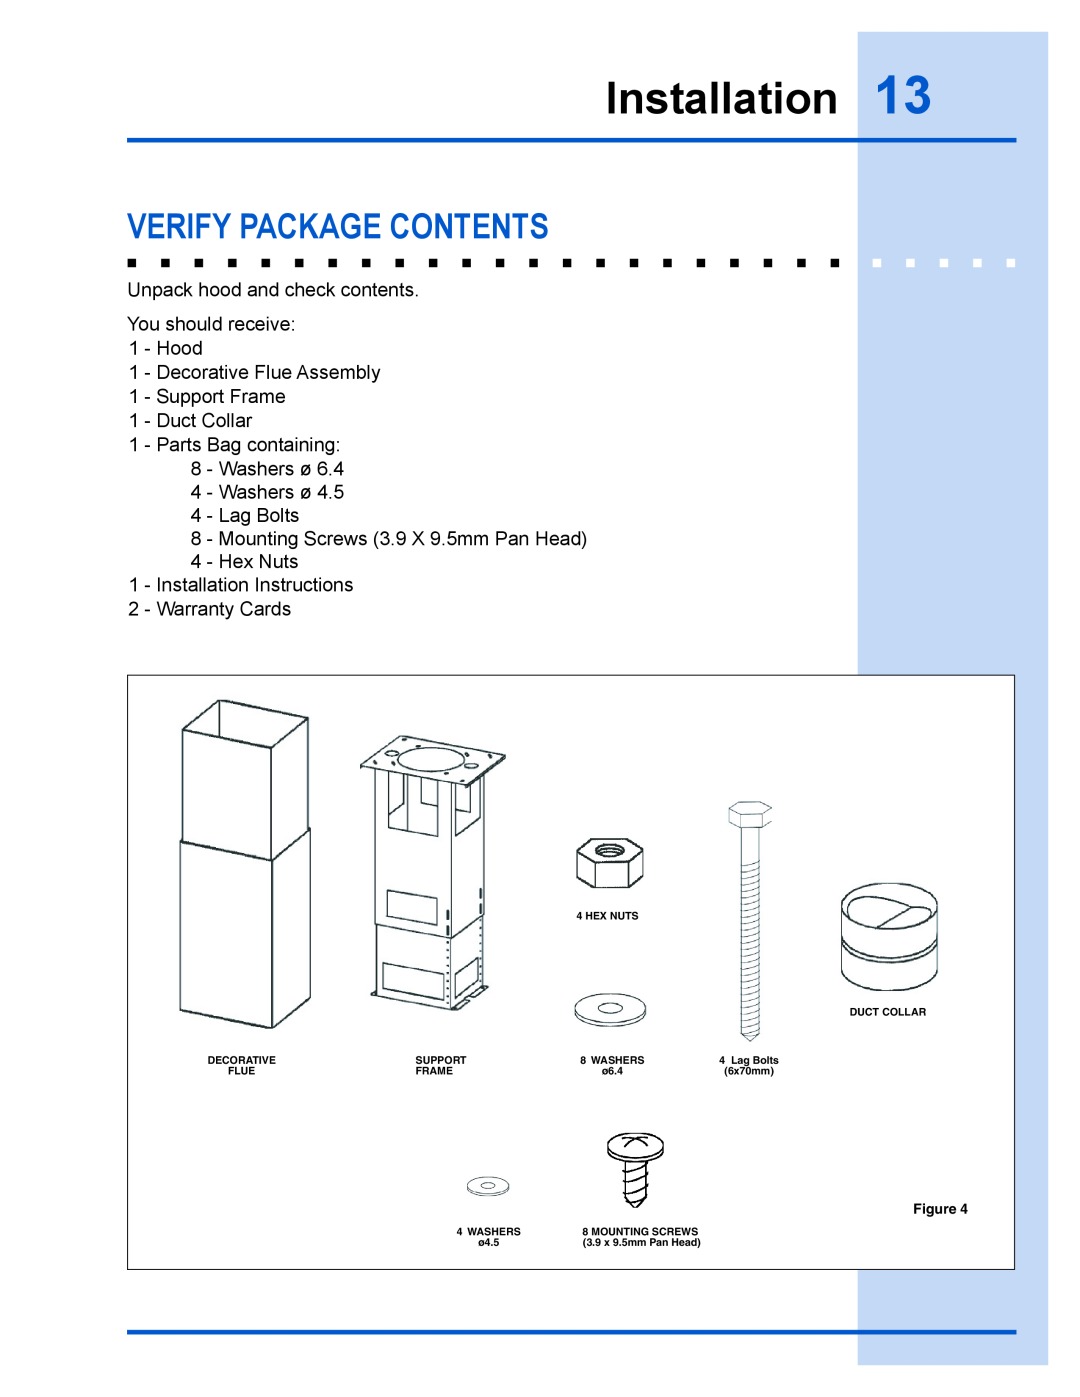 Electrolux E40PV100FS installation instructions Installation, Verify Package Contents 